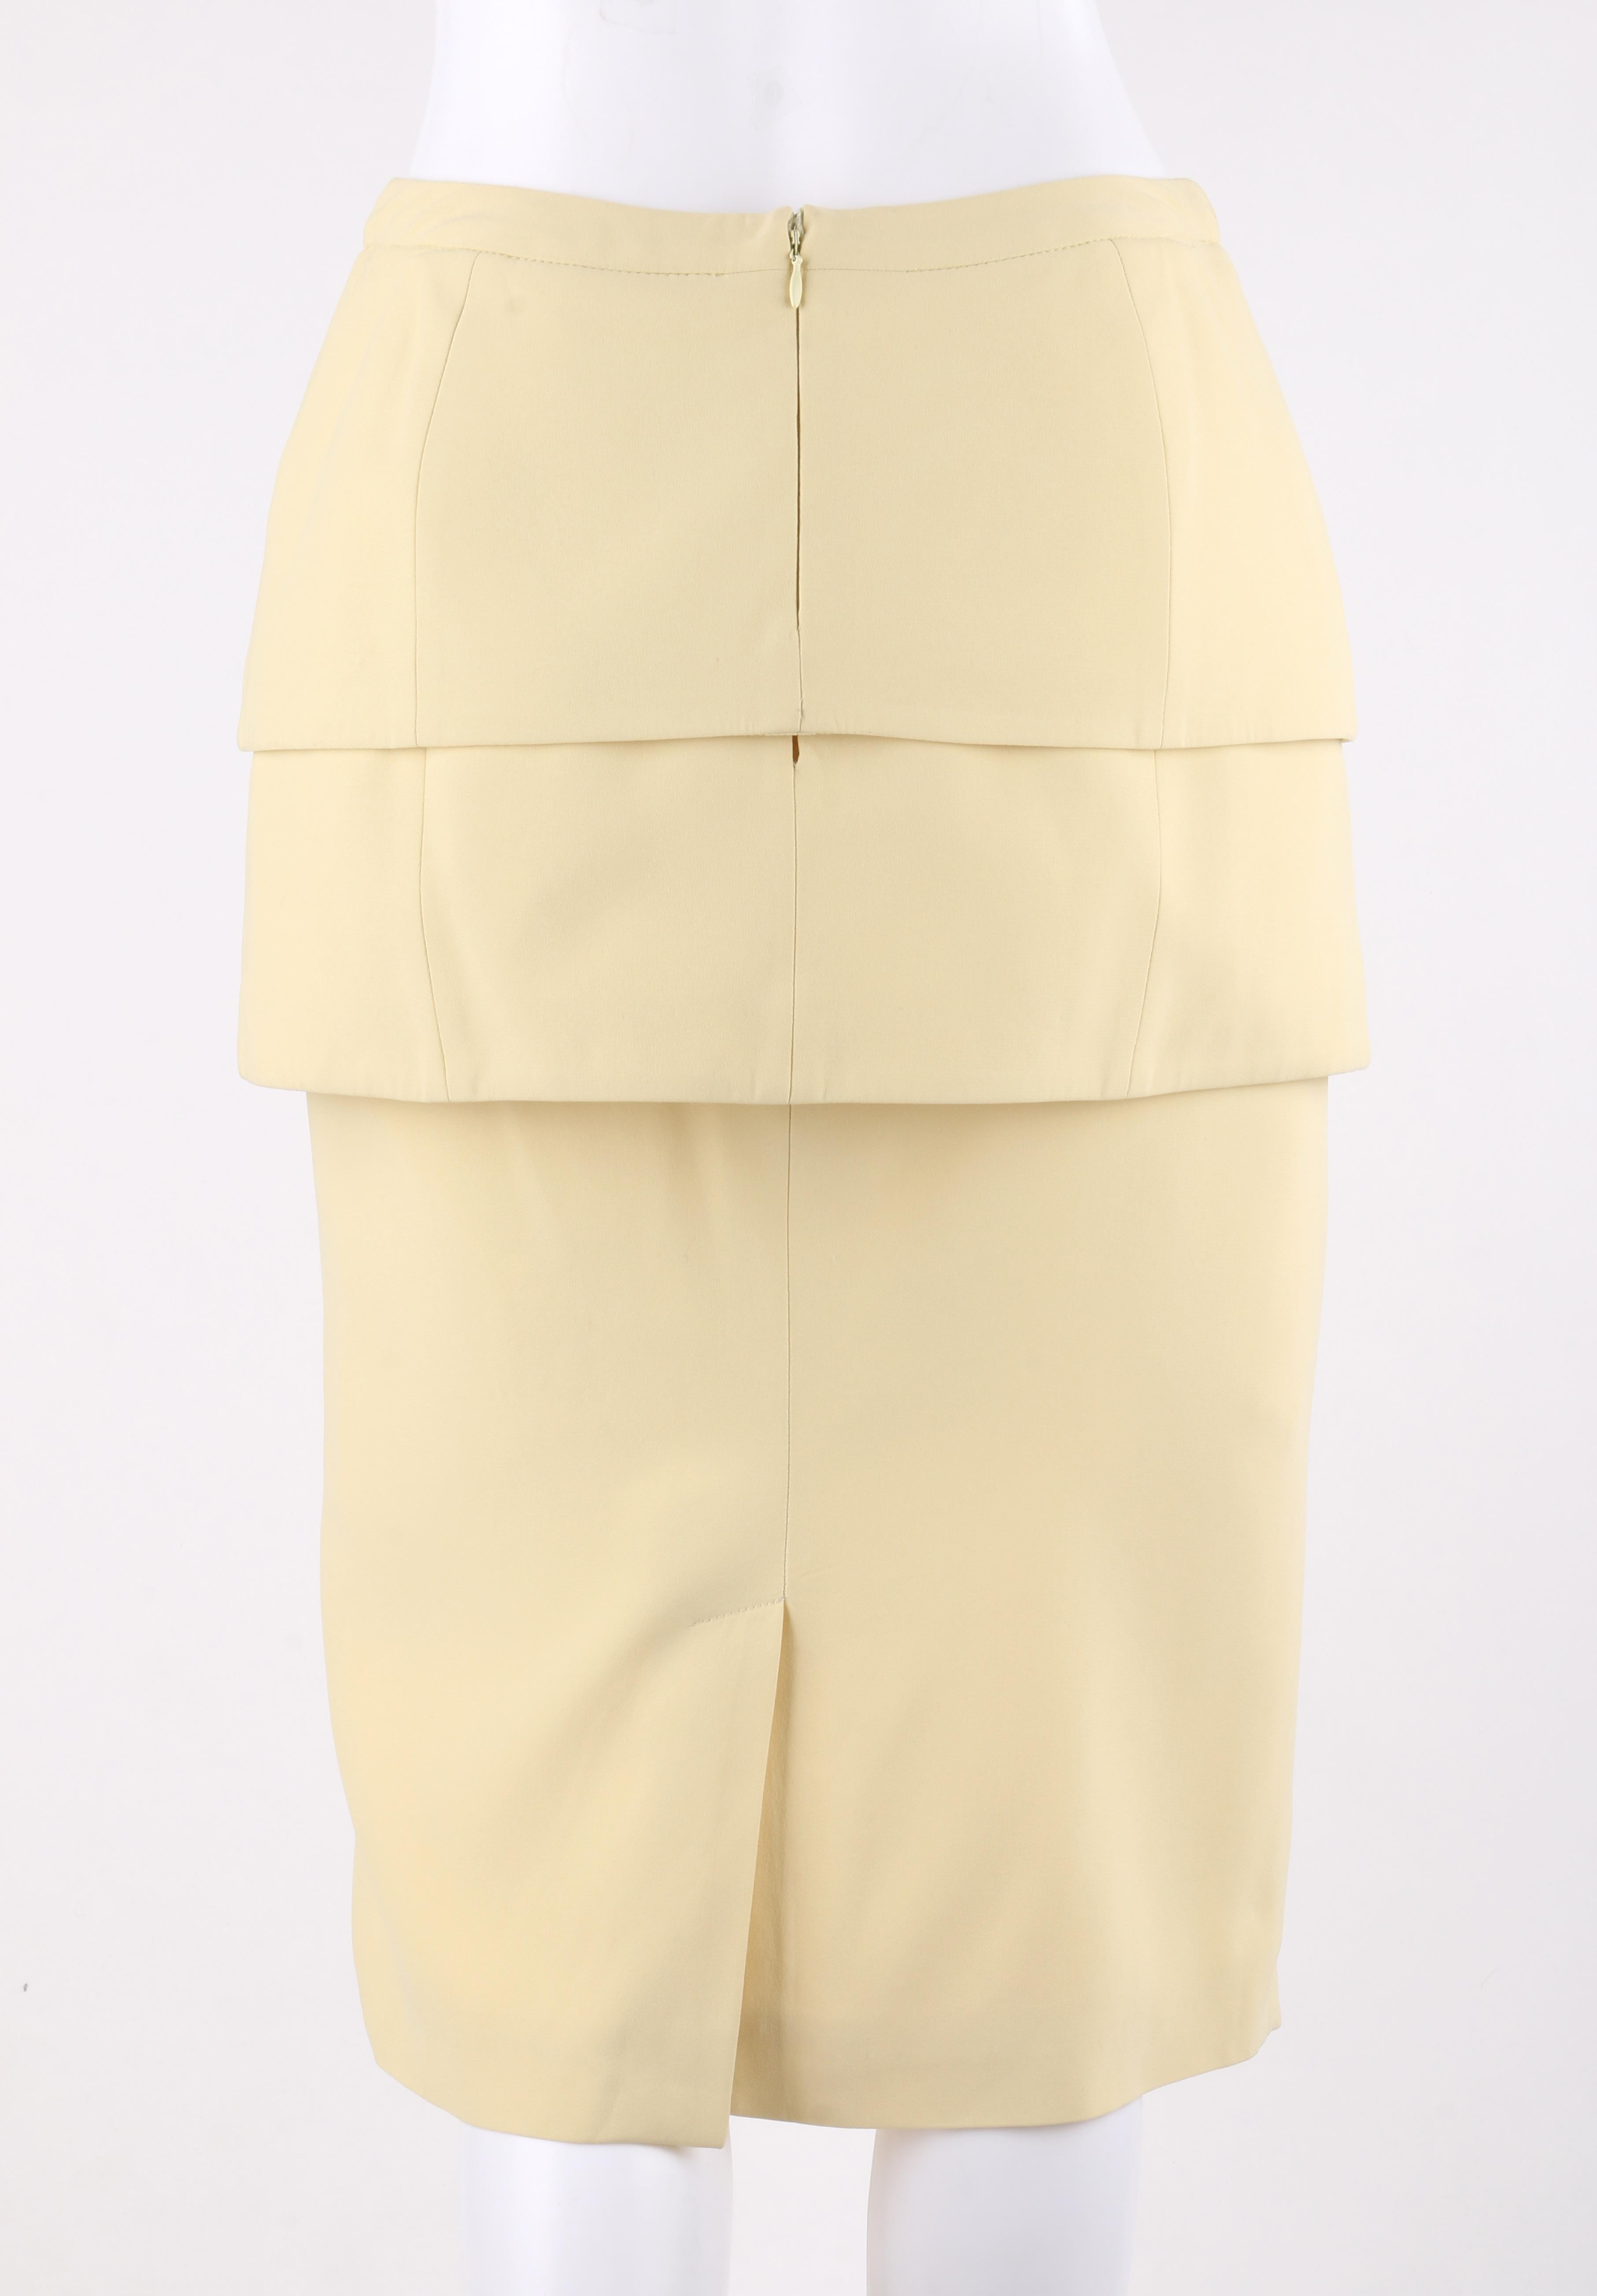 ALEXANDER McQUEEN S/S 2013 Pale Yellow Double Layer Peplum Midi Pencil Skirt In Good Condition In Thiensville, WI